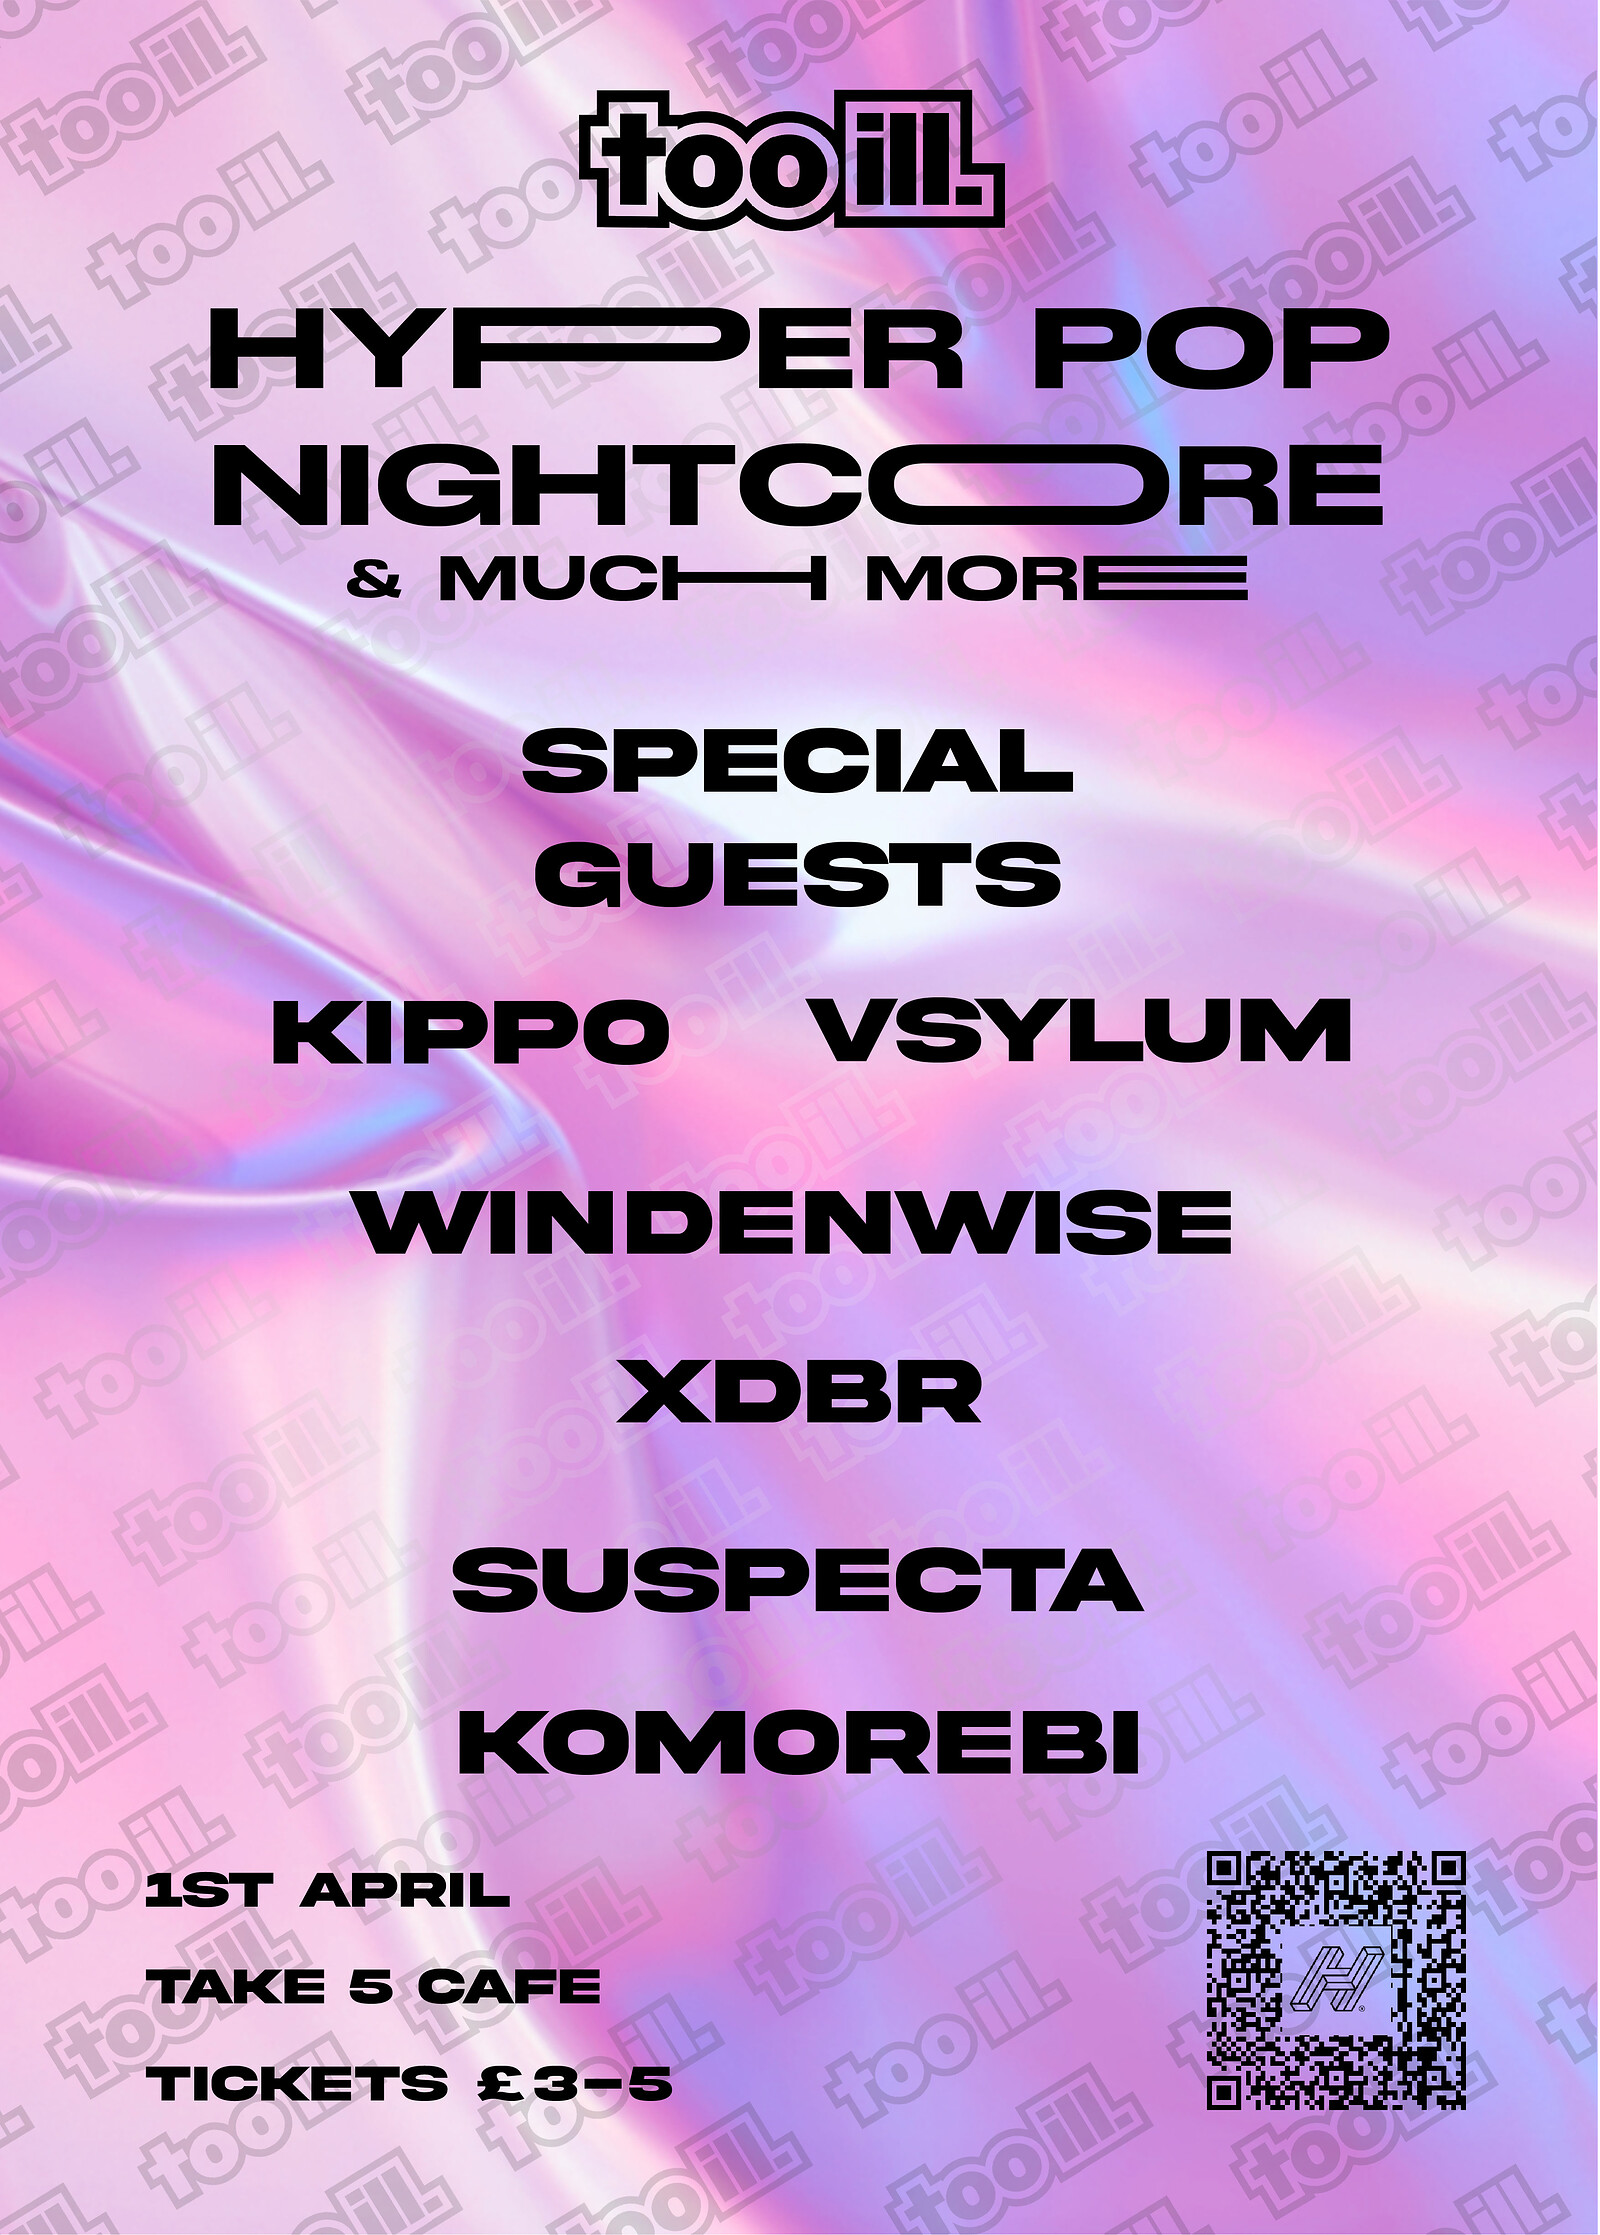 Too Ill: A Night of Hyperpop, Nightcore and more at Take Five Cafe